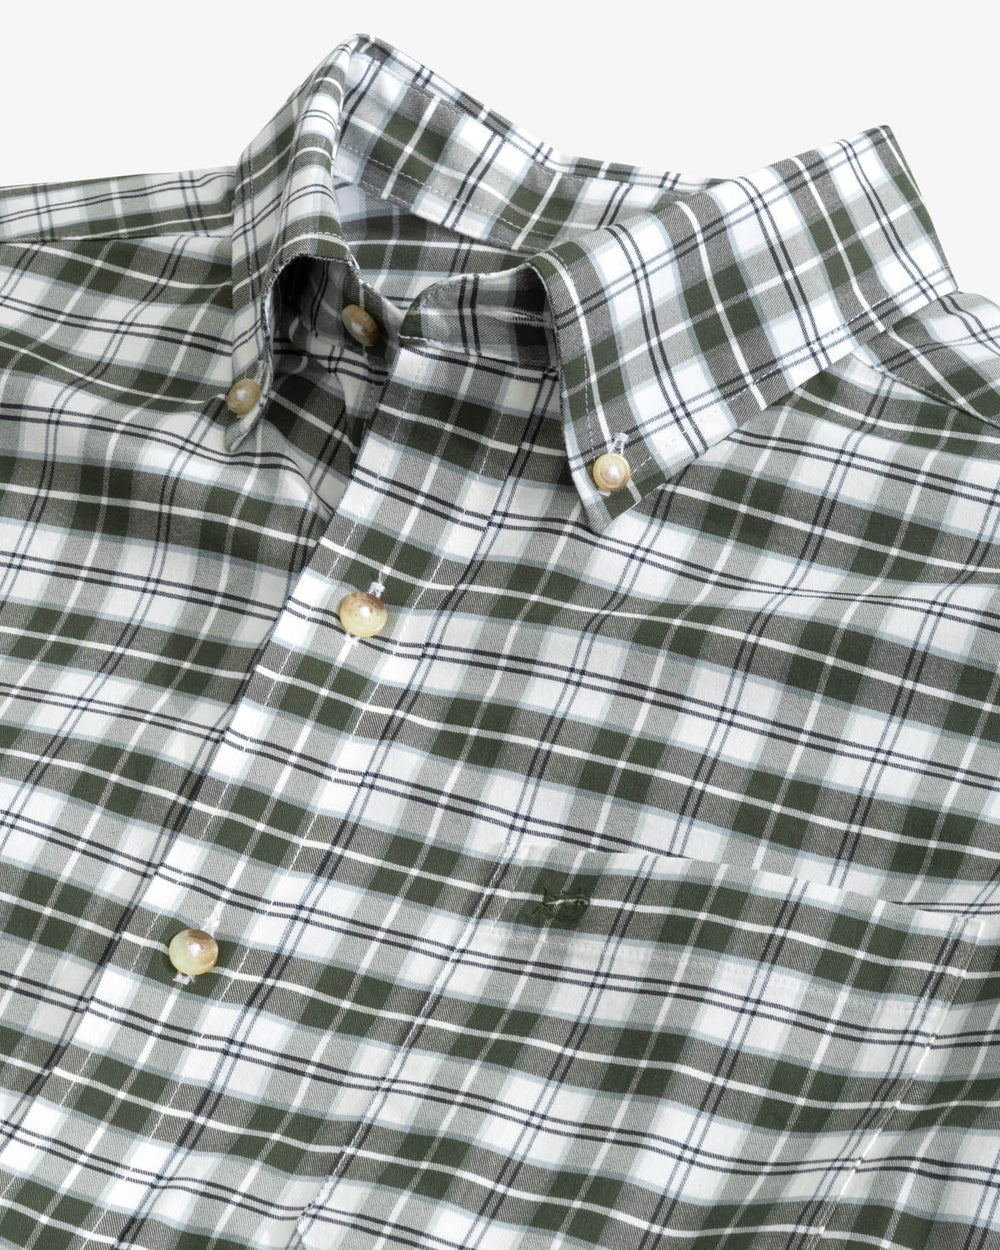 The detail view of the Southern Tide Coastal Passage Dearview Plaid Sport Shirt by Southern Tide - Gulf Green